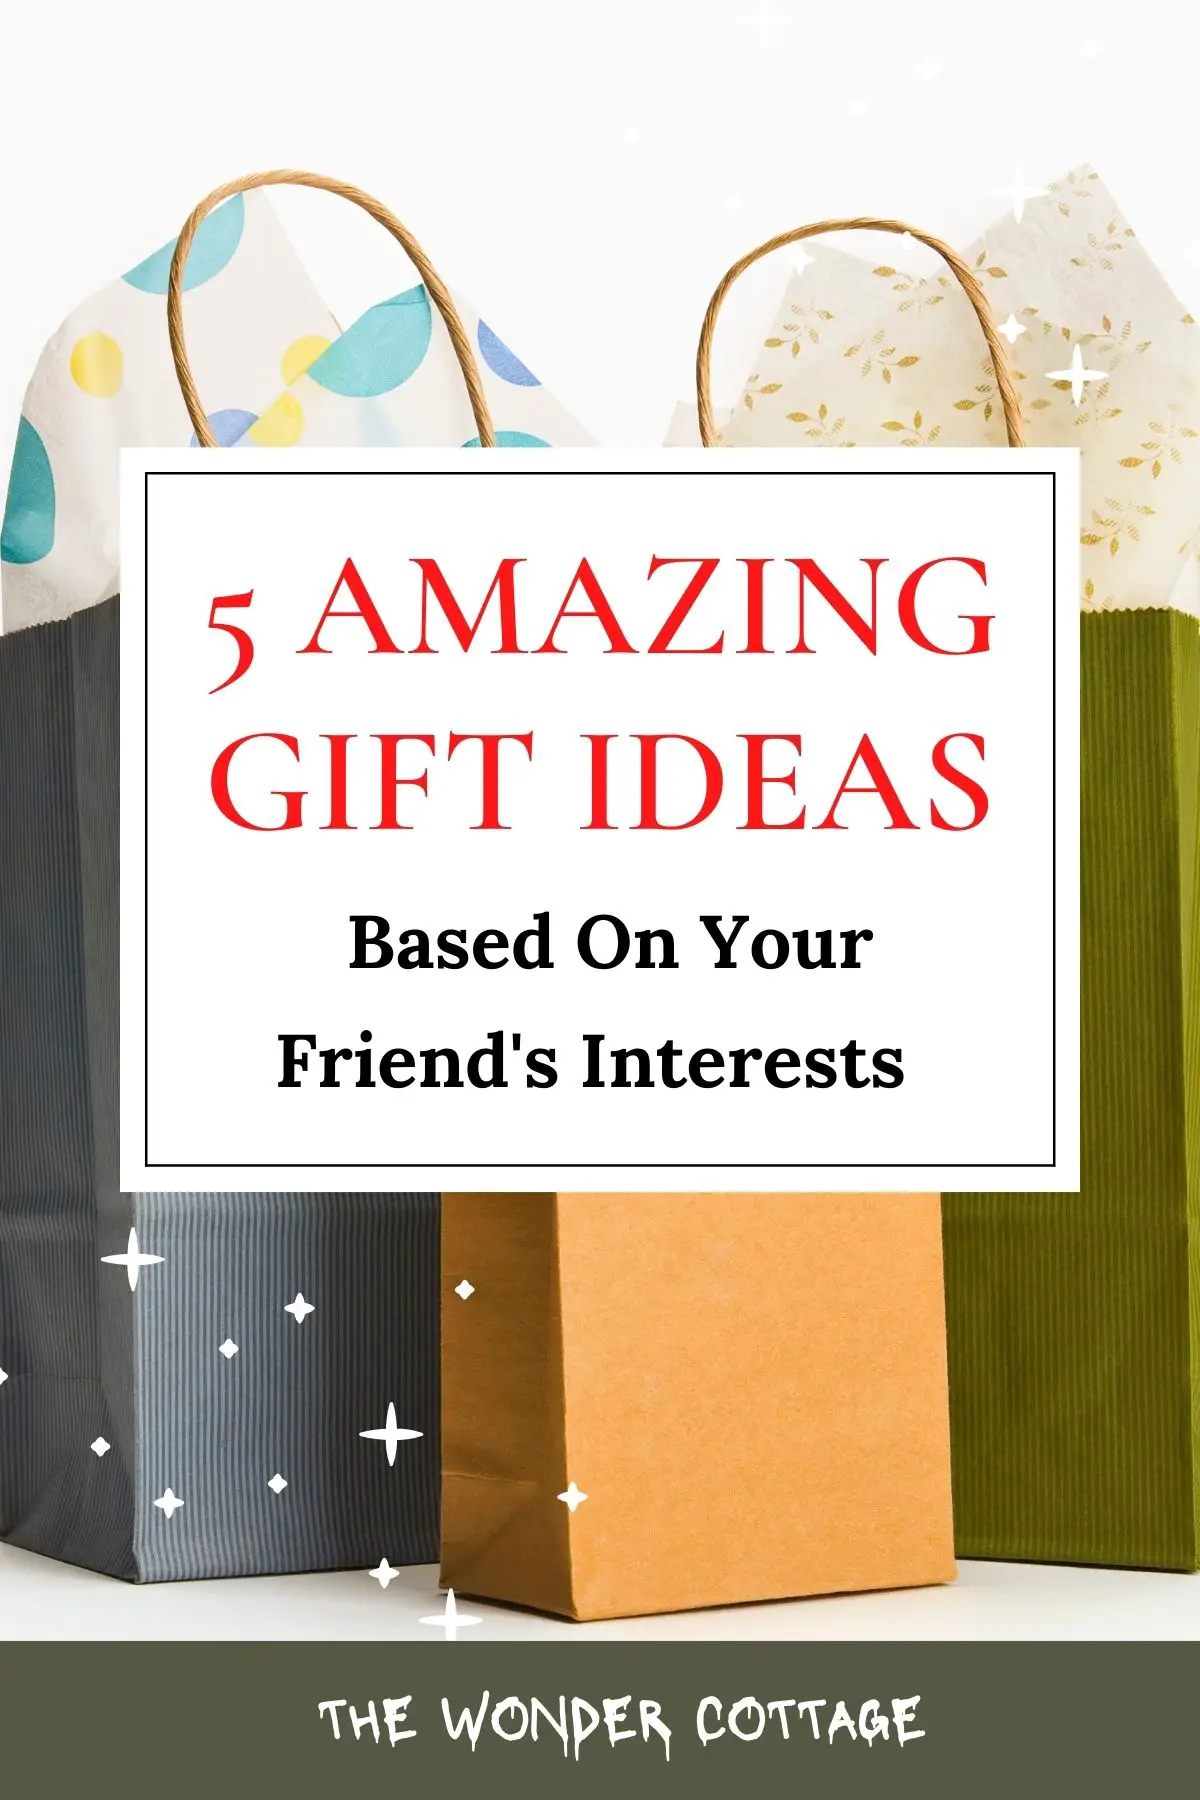 5 Amazing Gift Ideas Based On Your Friend's Interests 